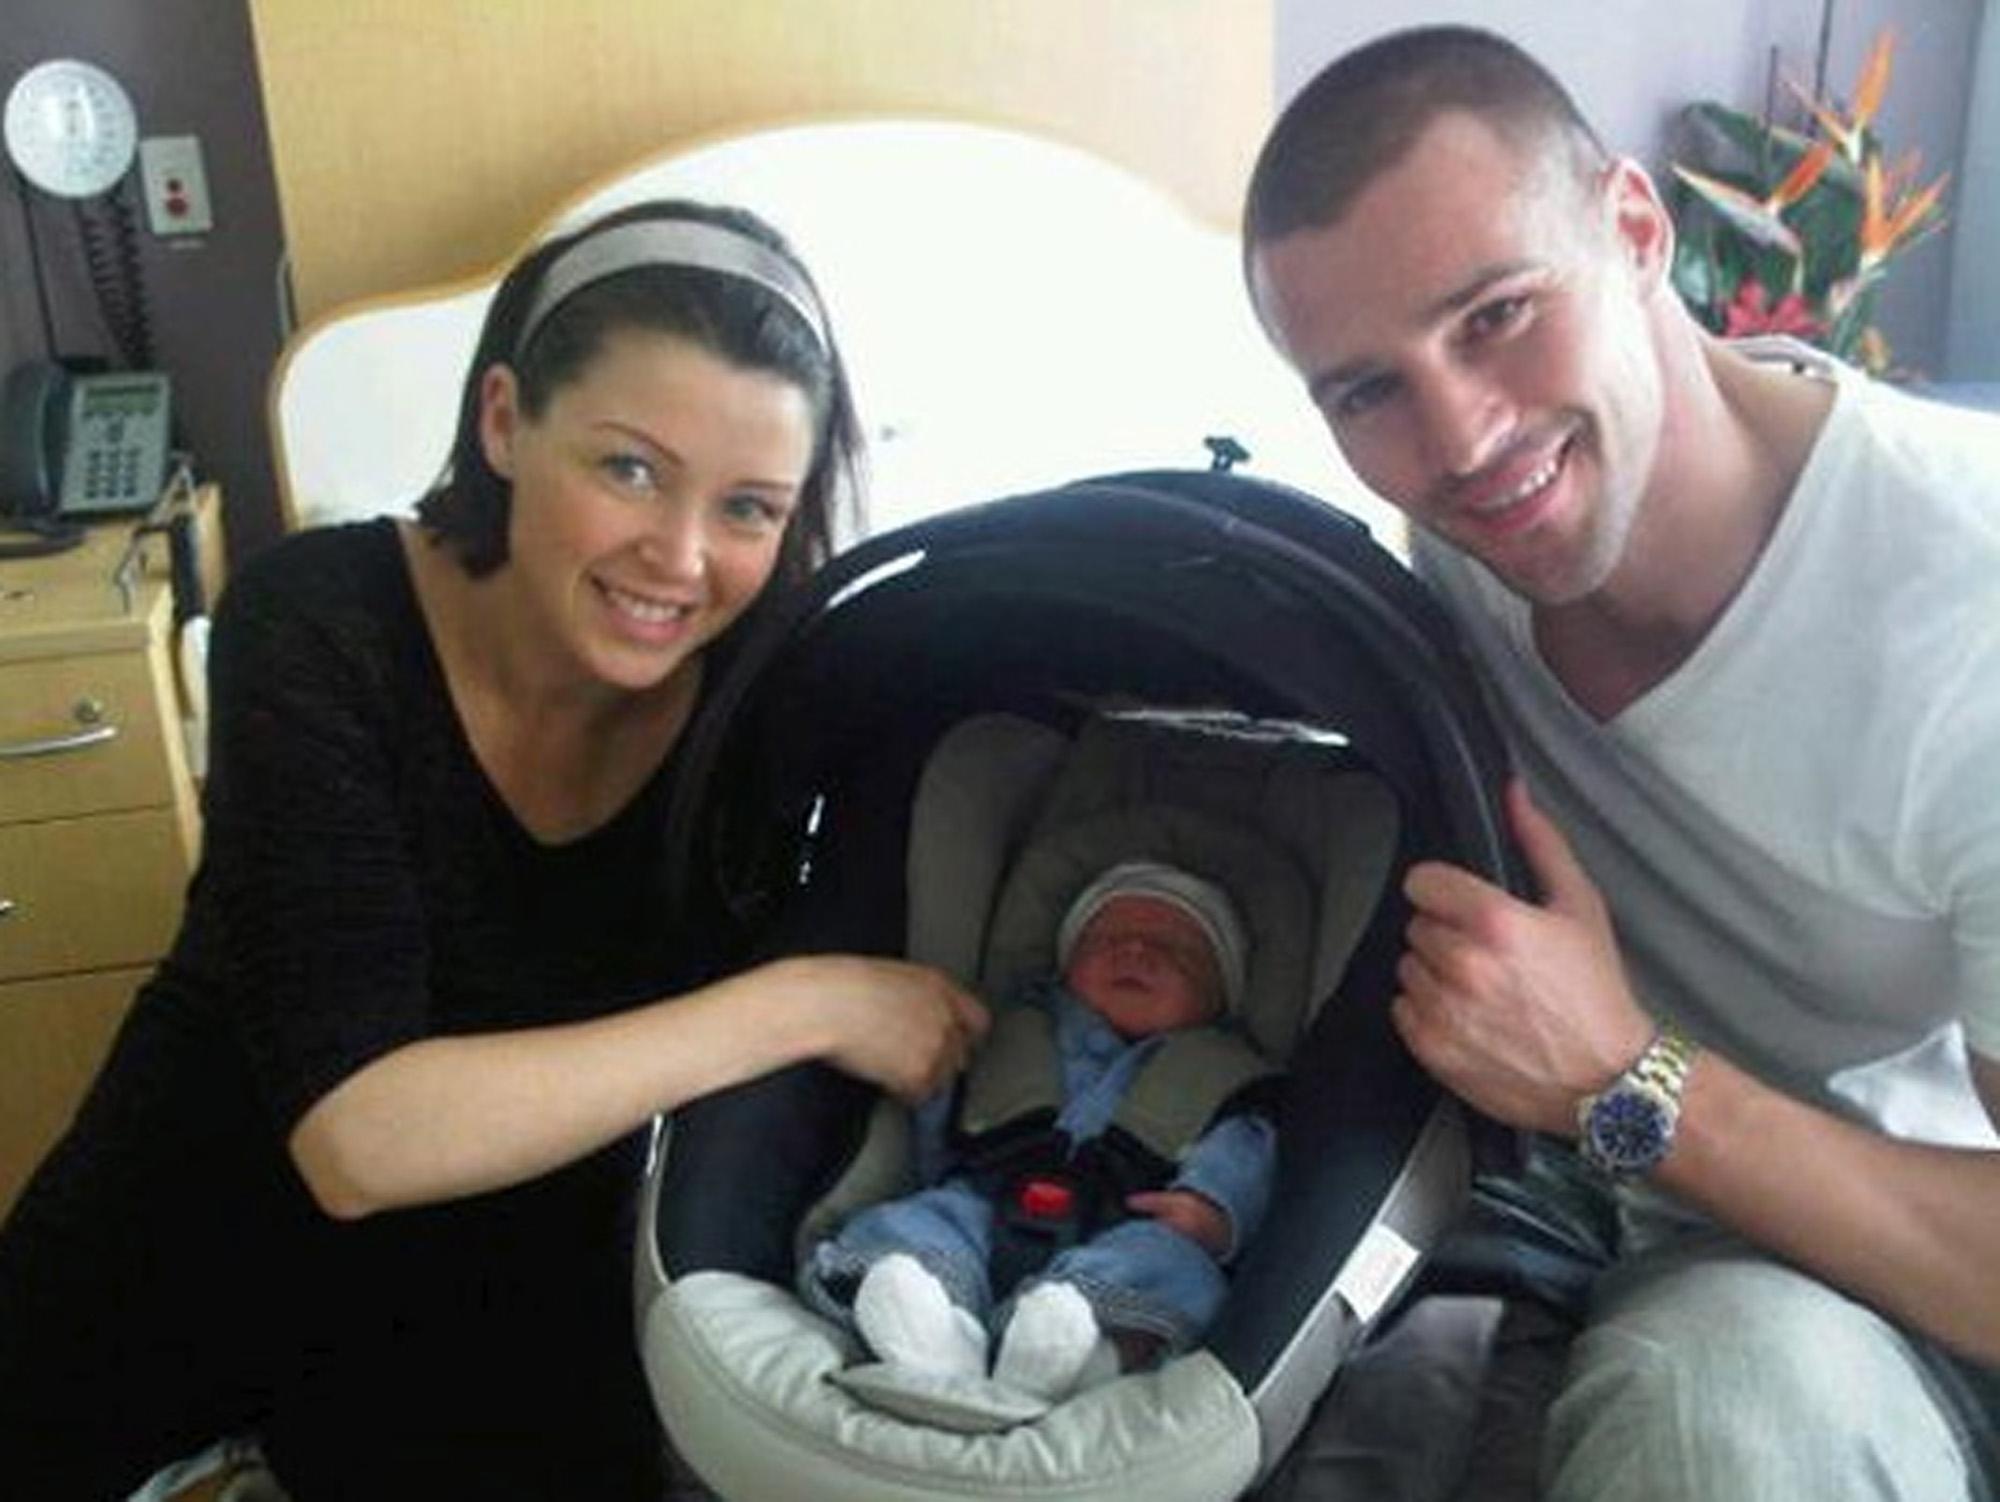 Dannii, Kris and baby Ethan!